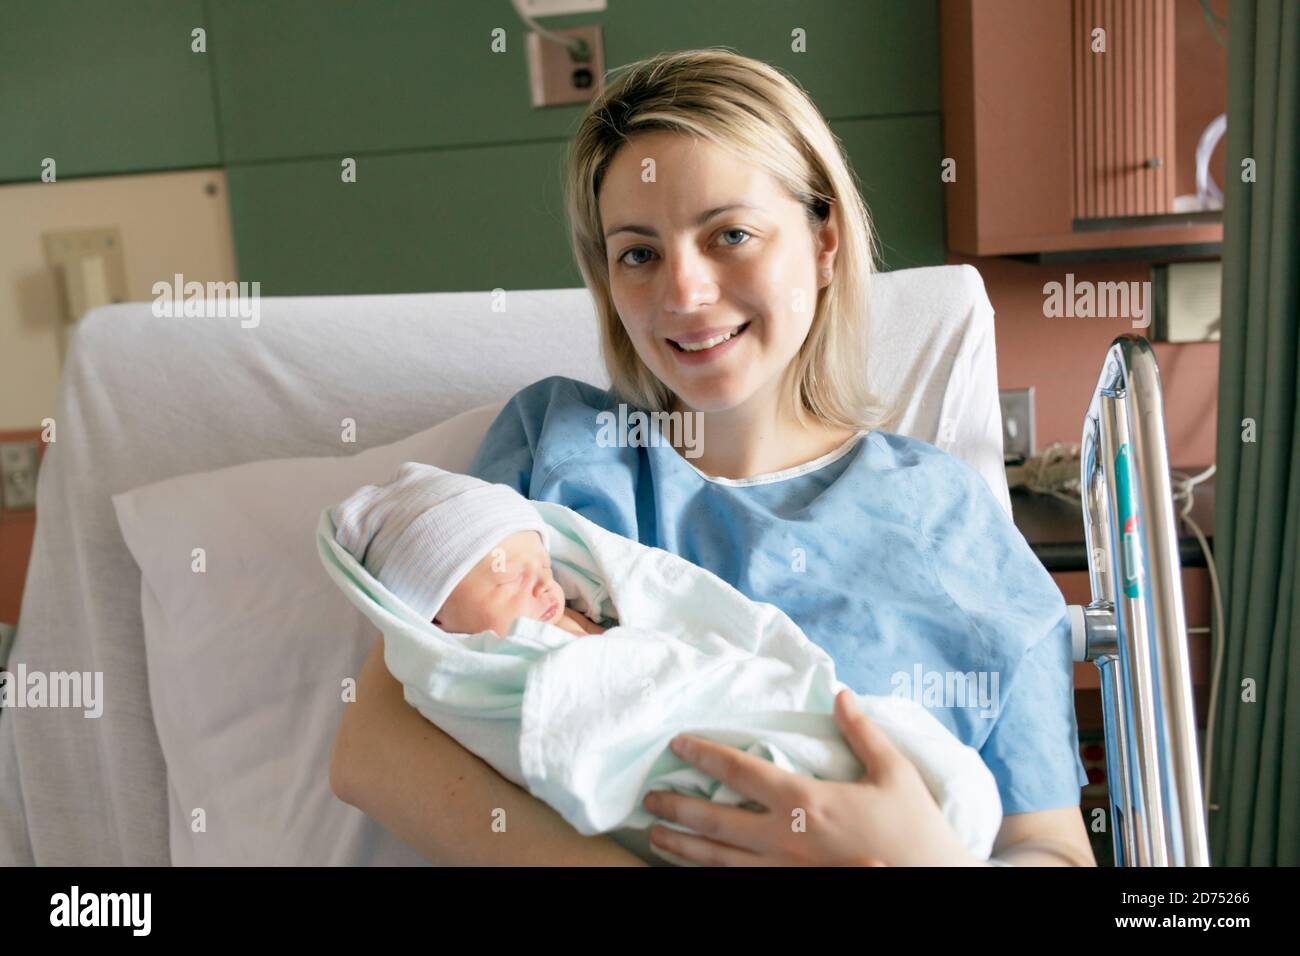 https://c8.alamy.com/comp/2D75266/mother-with-her-newborn-baby-at-the-hospital-a-day-after-a-natural-birth-labor-2D75266.jpg